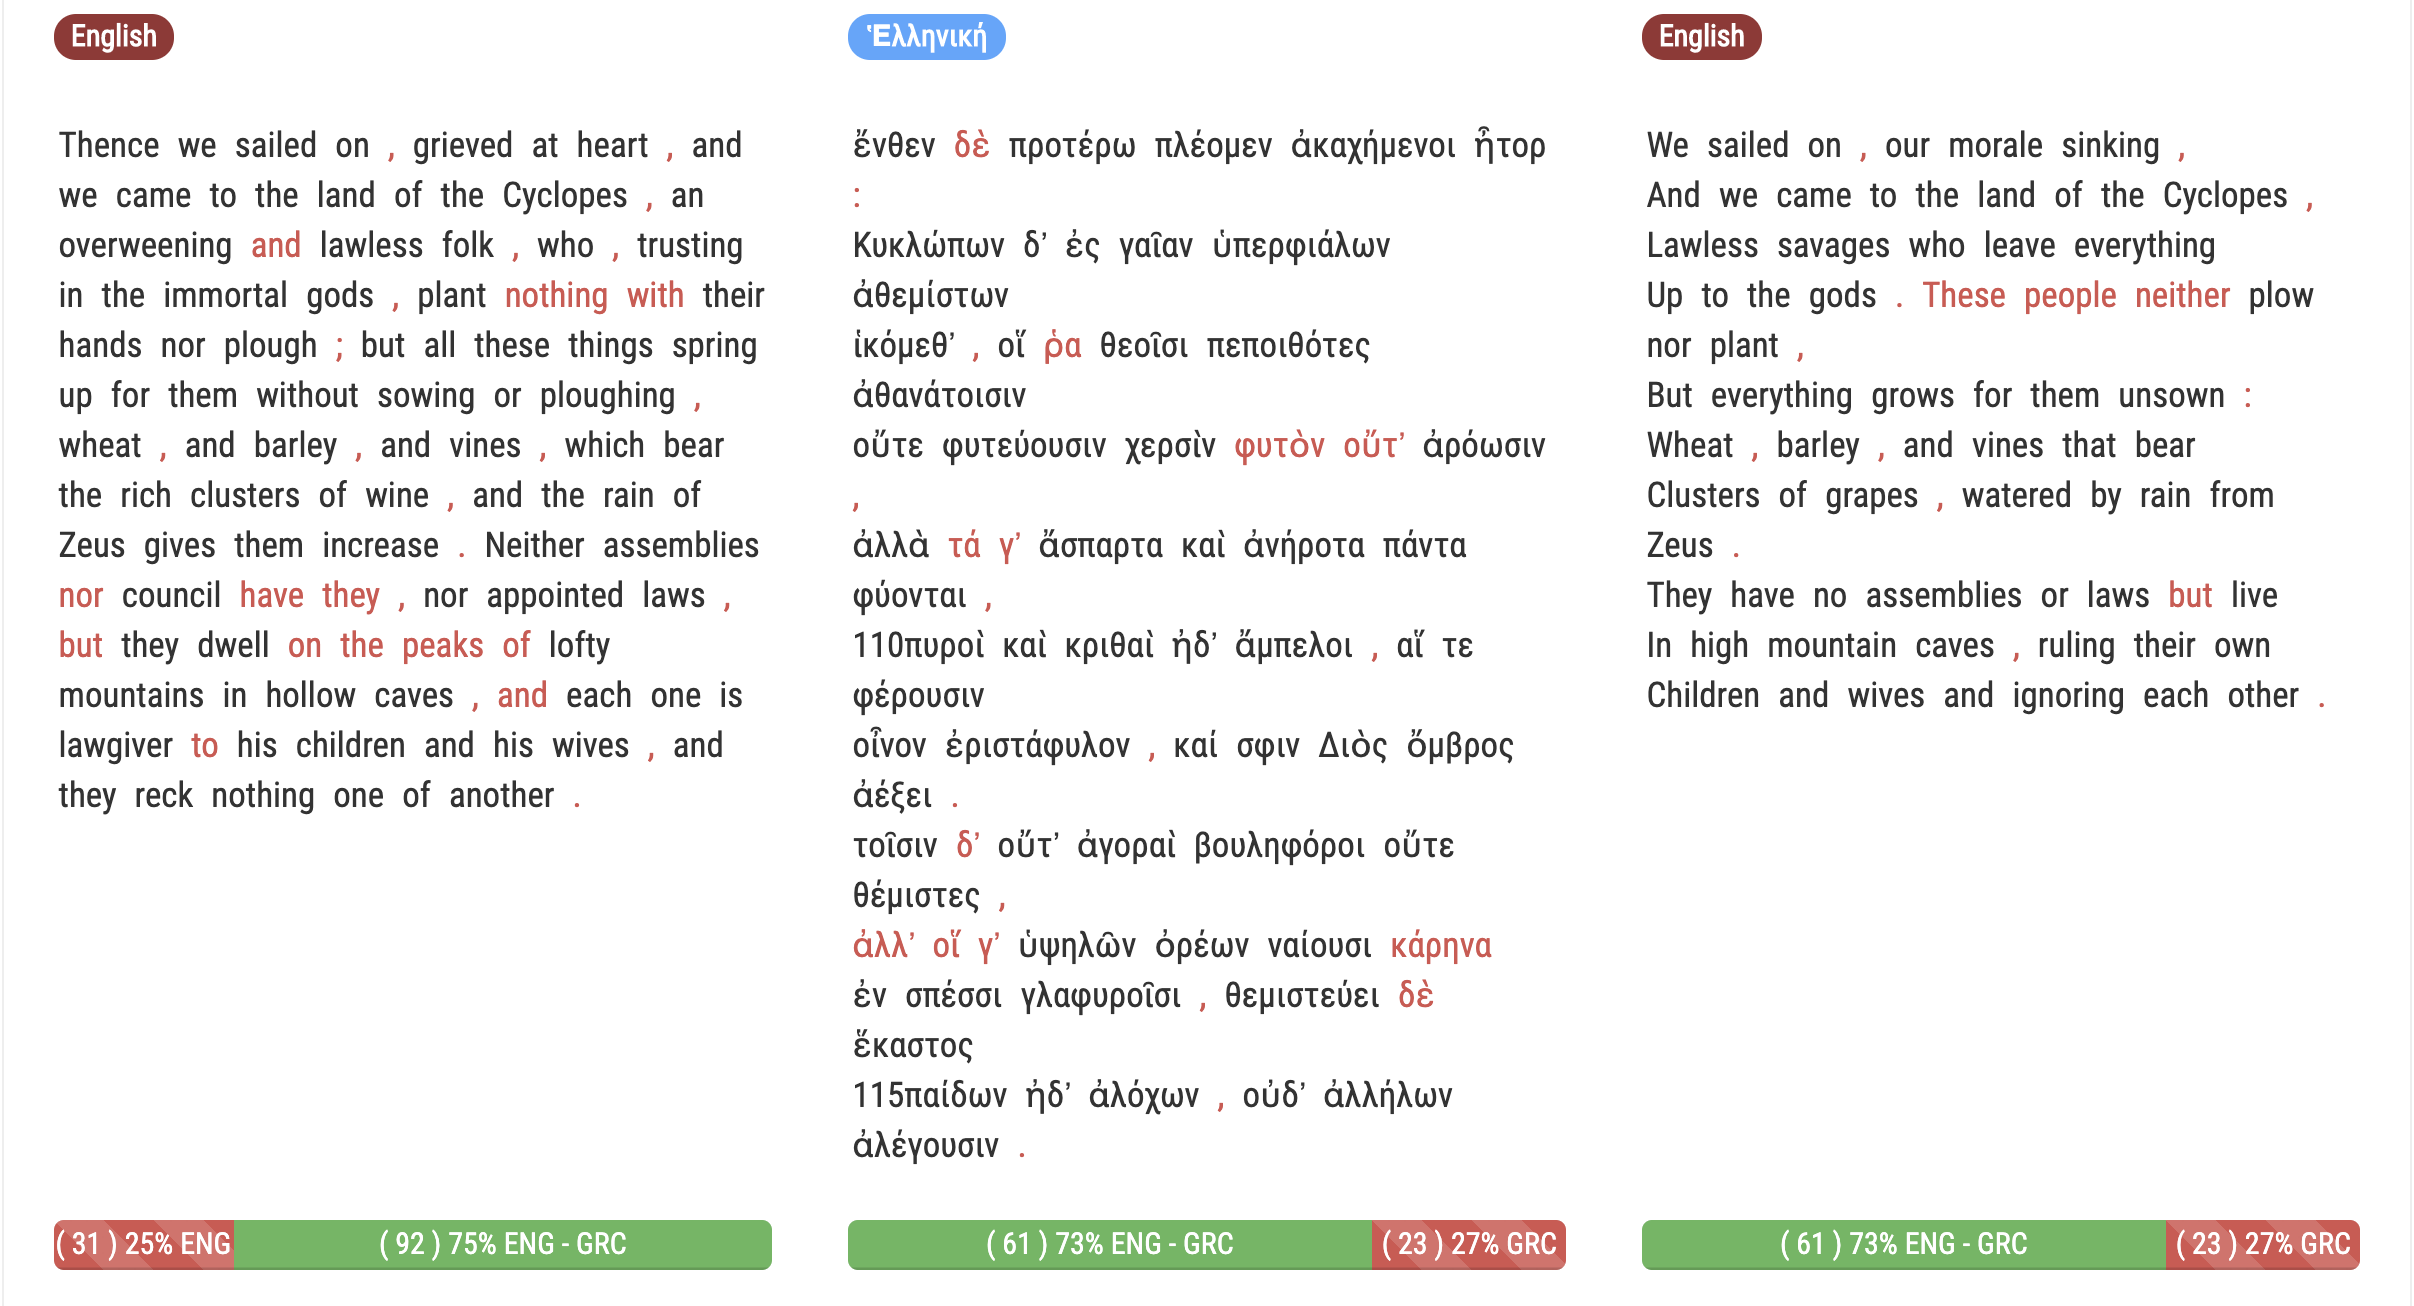 The Ancient Greek text is located at the center, and the two translations at the sides. The translation on the left displays a 75% of aligned pairs, the translation on the right a 73%.